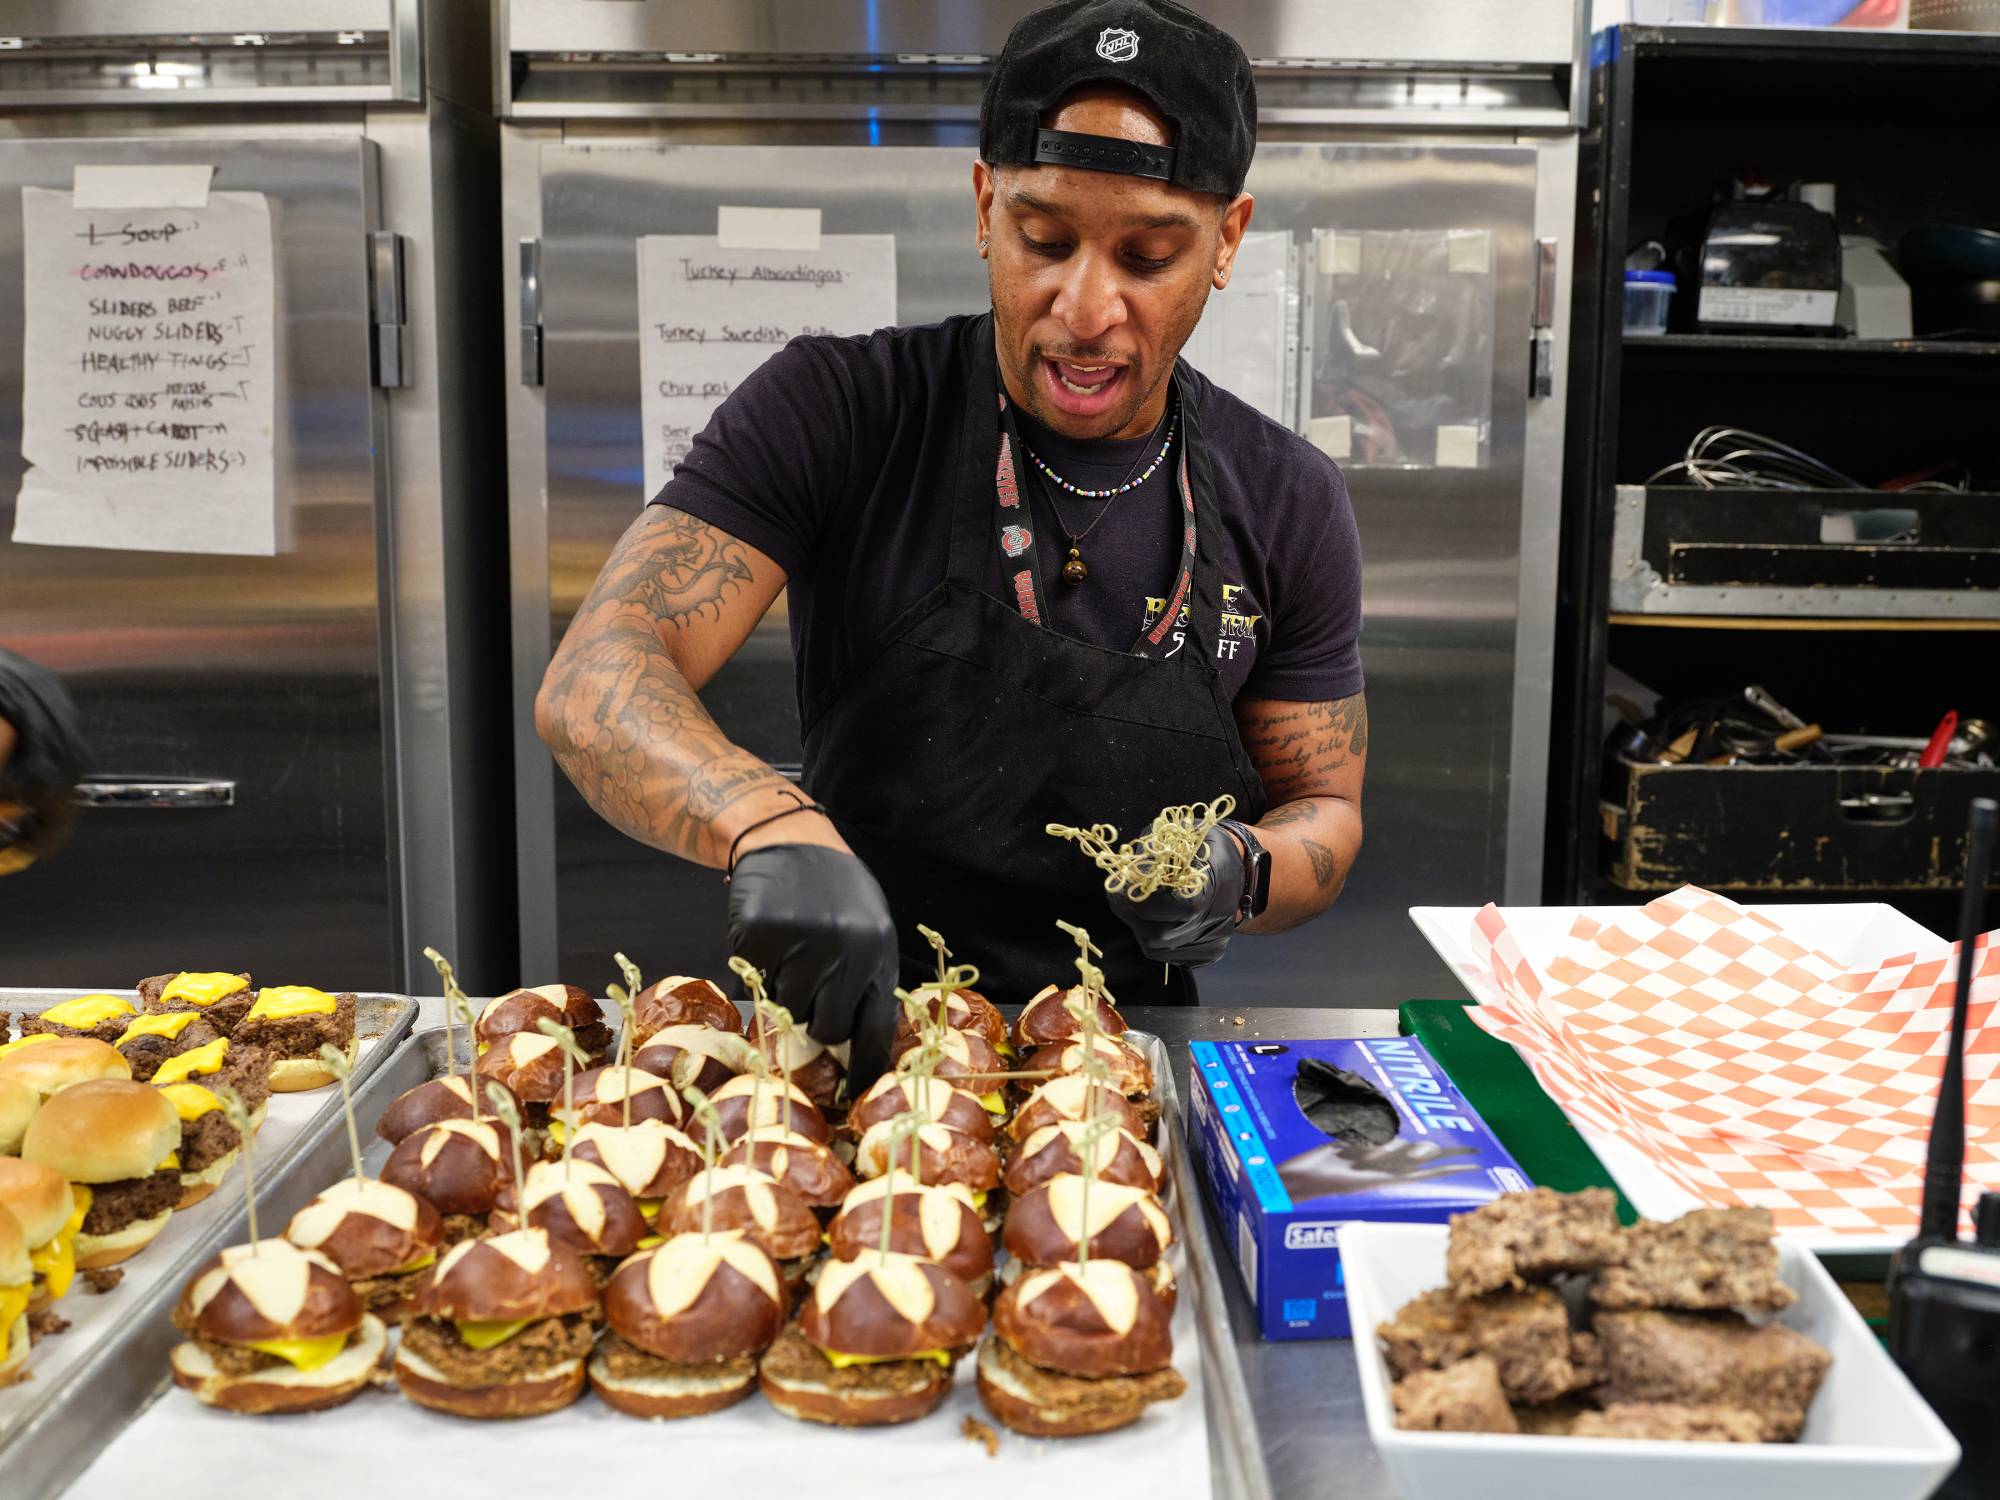 Jacob Curry puts some finishing touches on a sandwich spread at a Lizzo show. | MICHELLE GROSKOPF / THE NEW YORK TIMES